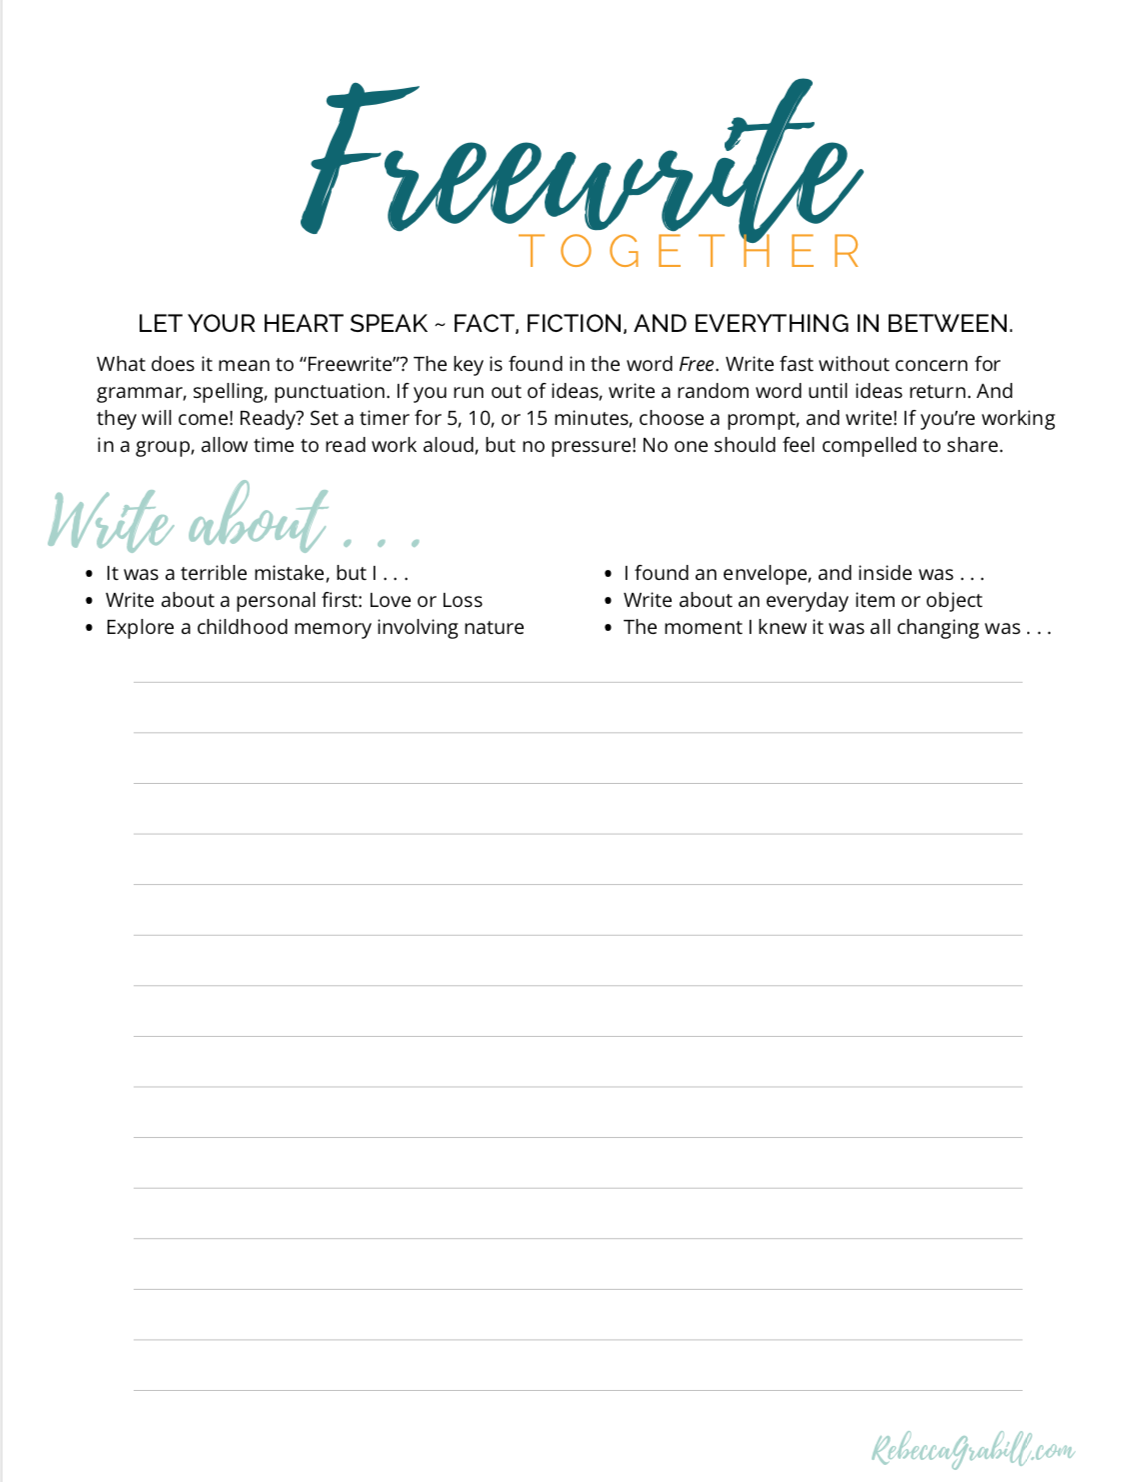 Sweetened Condensed Printable for Book Groups Freewrite